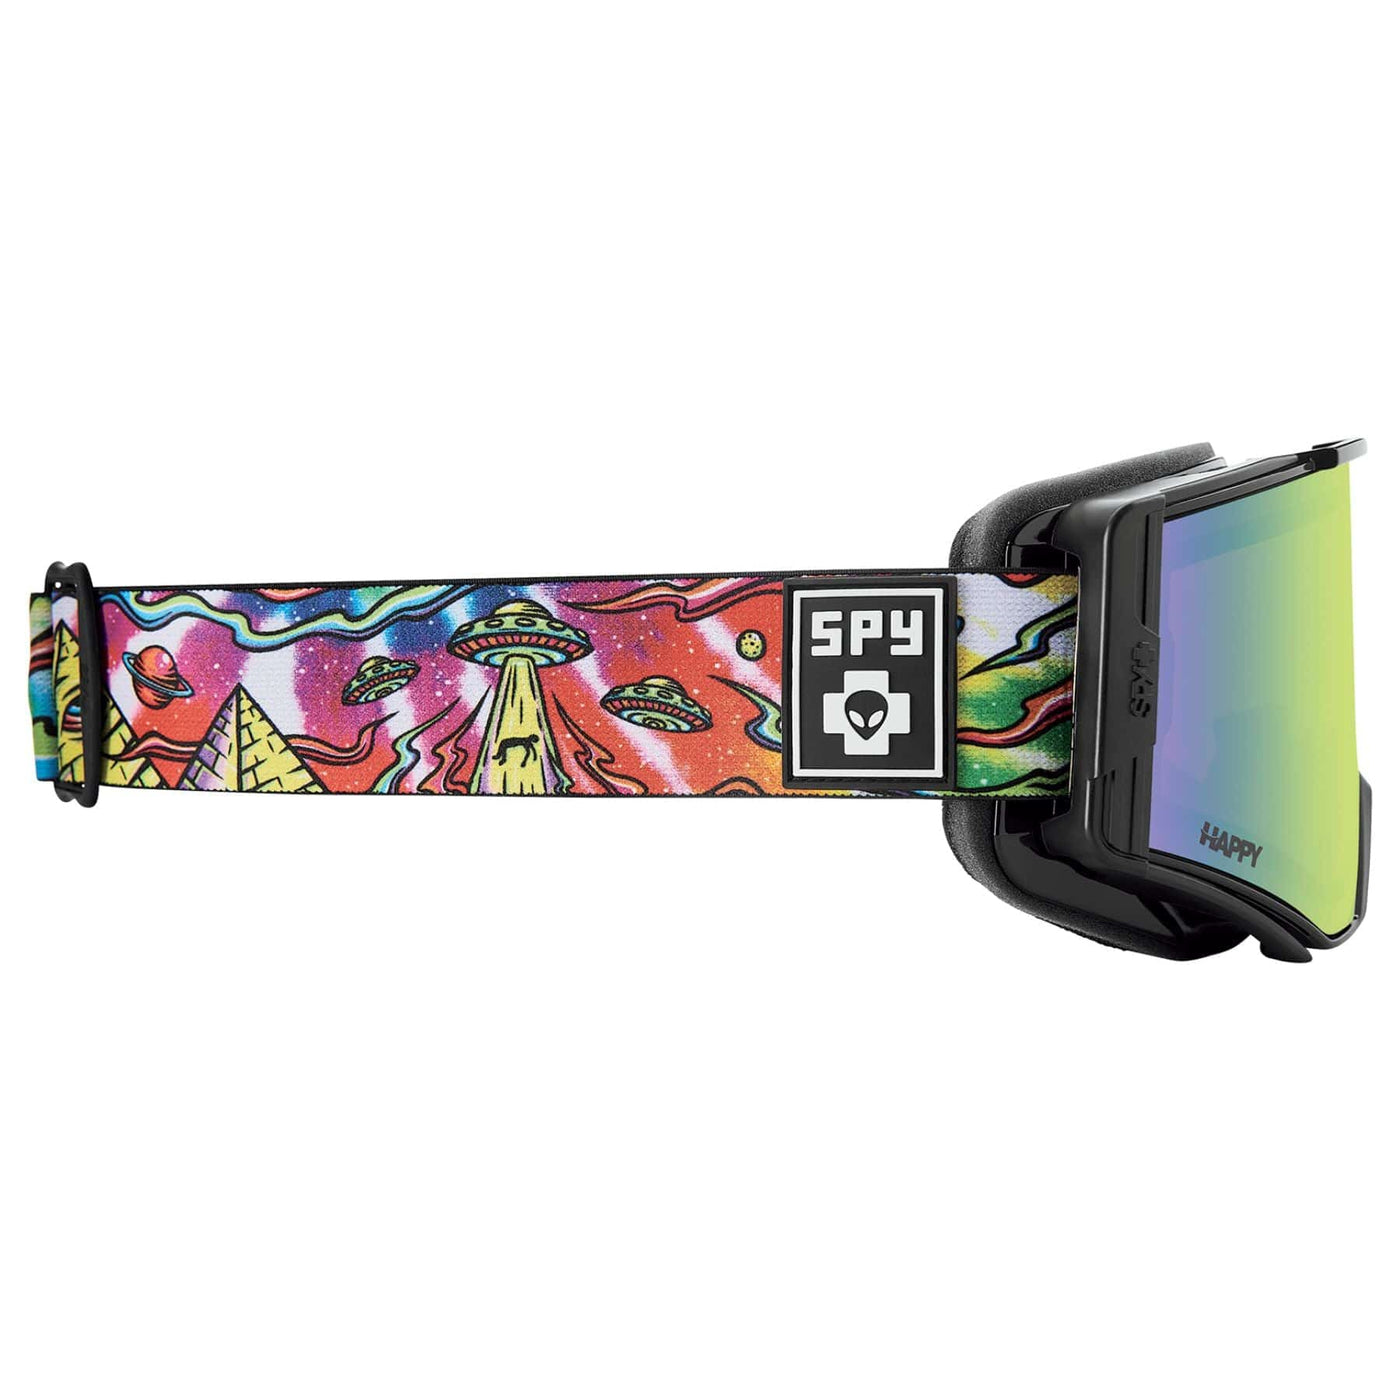 SPY Ace Snow Goggles Cosmic Attack Multi Green 8Lines Shop - Fast Shipping